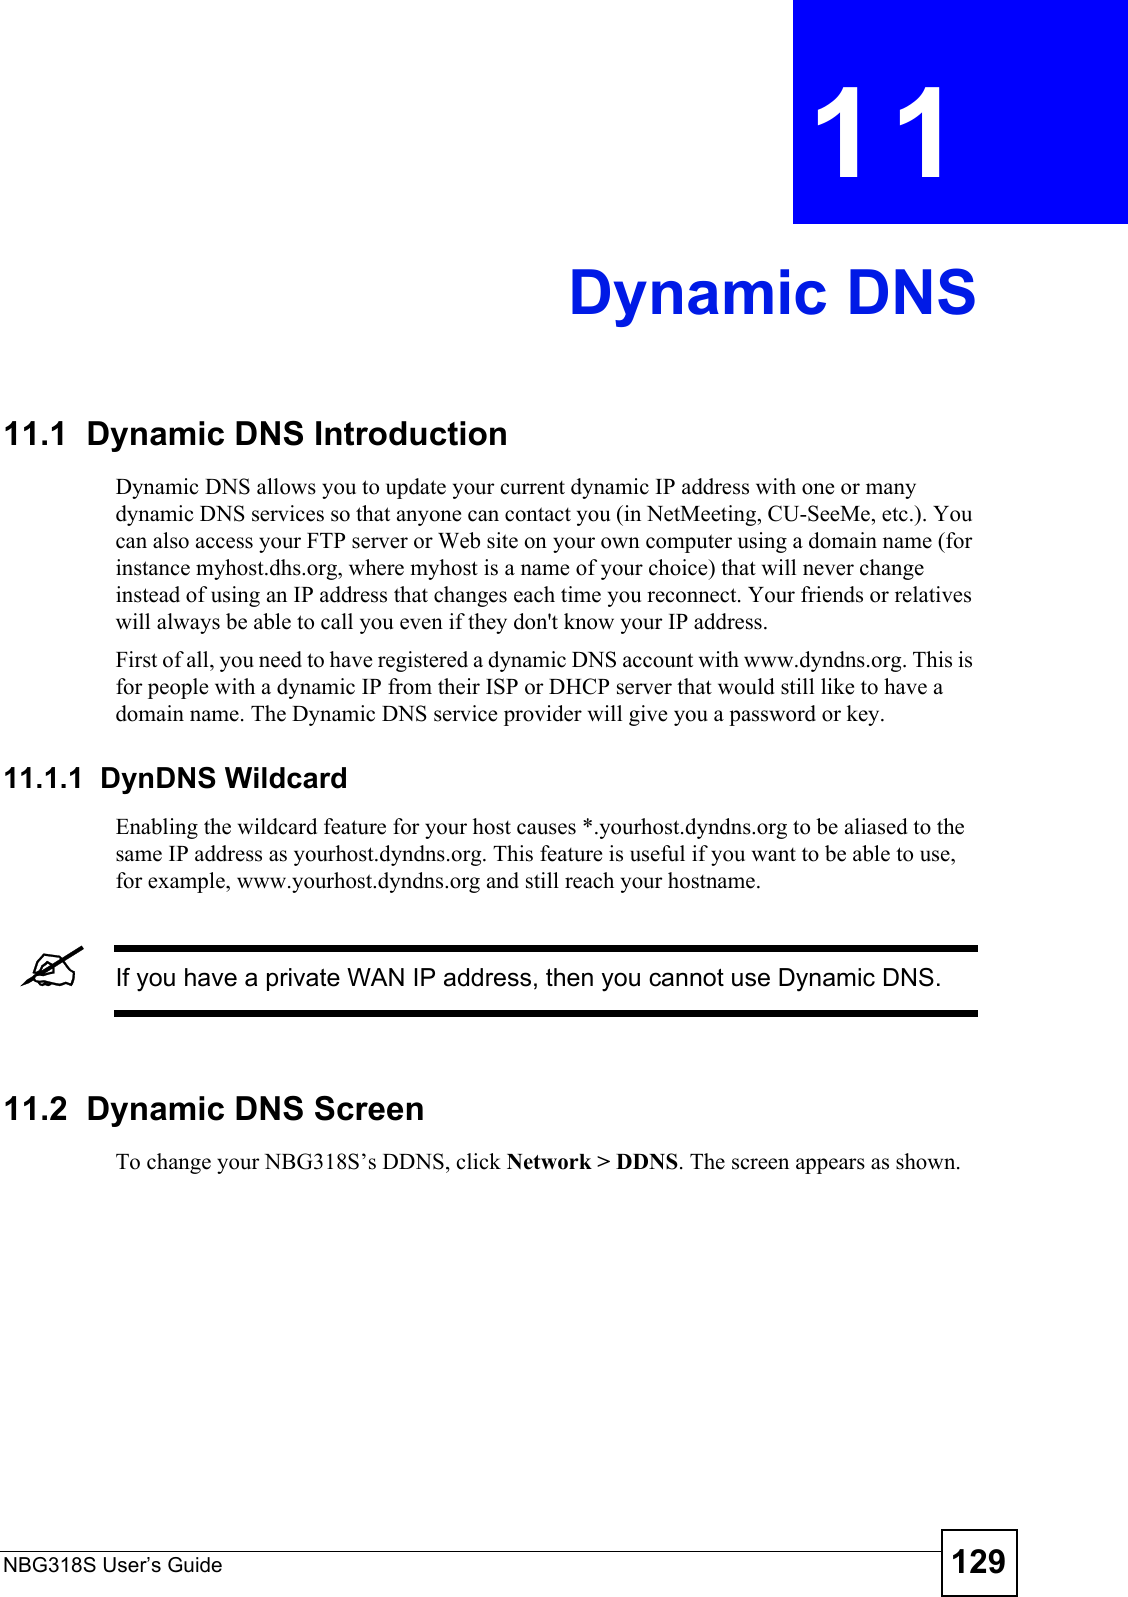 NBG318S User’s Guide 129CHAPTER  11 Dynamic DNS11.1  Dynamic DNS Introduction Dynamic DNS allows you to update your current dynamic IP address with one or many dynamic DNS services so that anyone can contact you (in NetMeeting, CU-SeeMe, etc.). You can also access your FTP server or Web site on your own computer using a domain name (for instance myhost.dhs.org, where myhost is a name of your choice) that will never change instead of using an IP address that changes each time you reconnect. Your friends or relatives will always be able to call you even if they don&apos;t know your IP address.First of all, you need to have registered a dynamic DNS account with www.dyndns.org. This is for people with a dynamic IP from their ISP or DHCP server that would still like to have a domain name. The Dynamic DNS service provider will give you a password or key.11.1.1  DynDNS Wildcard Enabling the wildcard feature for your host causes *.yourhost.dyndns.org to be aliased to the same IP address as yourhost.dyndns.org. This feature is useful if you want to be able to use, for example, www.yourhost.dyndns.org and still reach your hostname.&quot;If you have a private WAN IP address, then you cannot use Dynamic DNS.11.2  Dynamic DNS Screen   To change your NBG318S’s DDNS, click Network &gt; DDNS. The screen appears as shown.